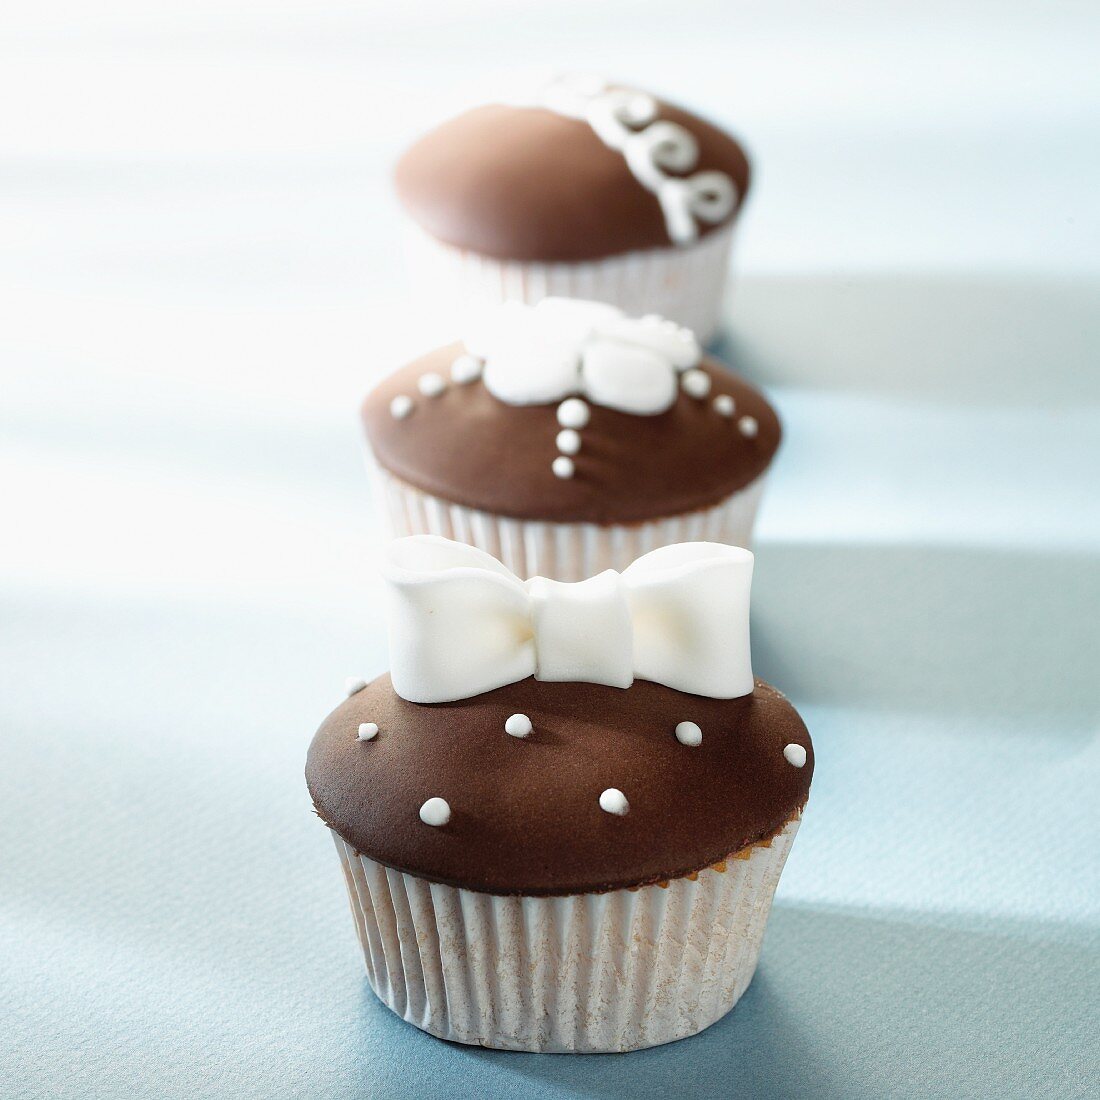 Three cupcakes with brown and white decorations